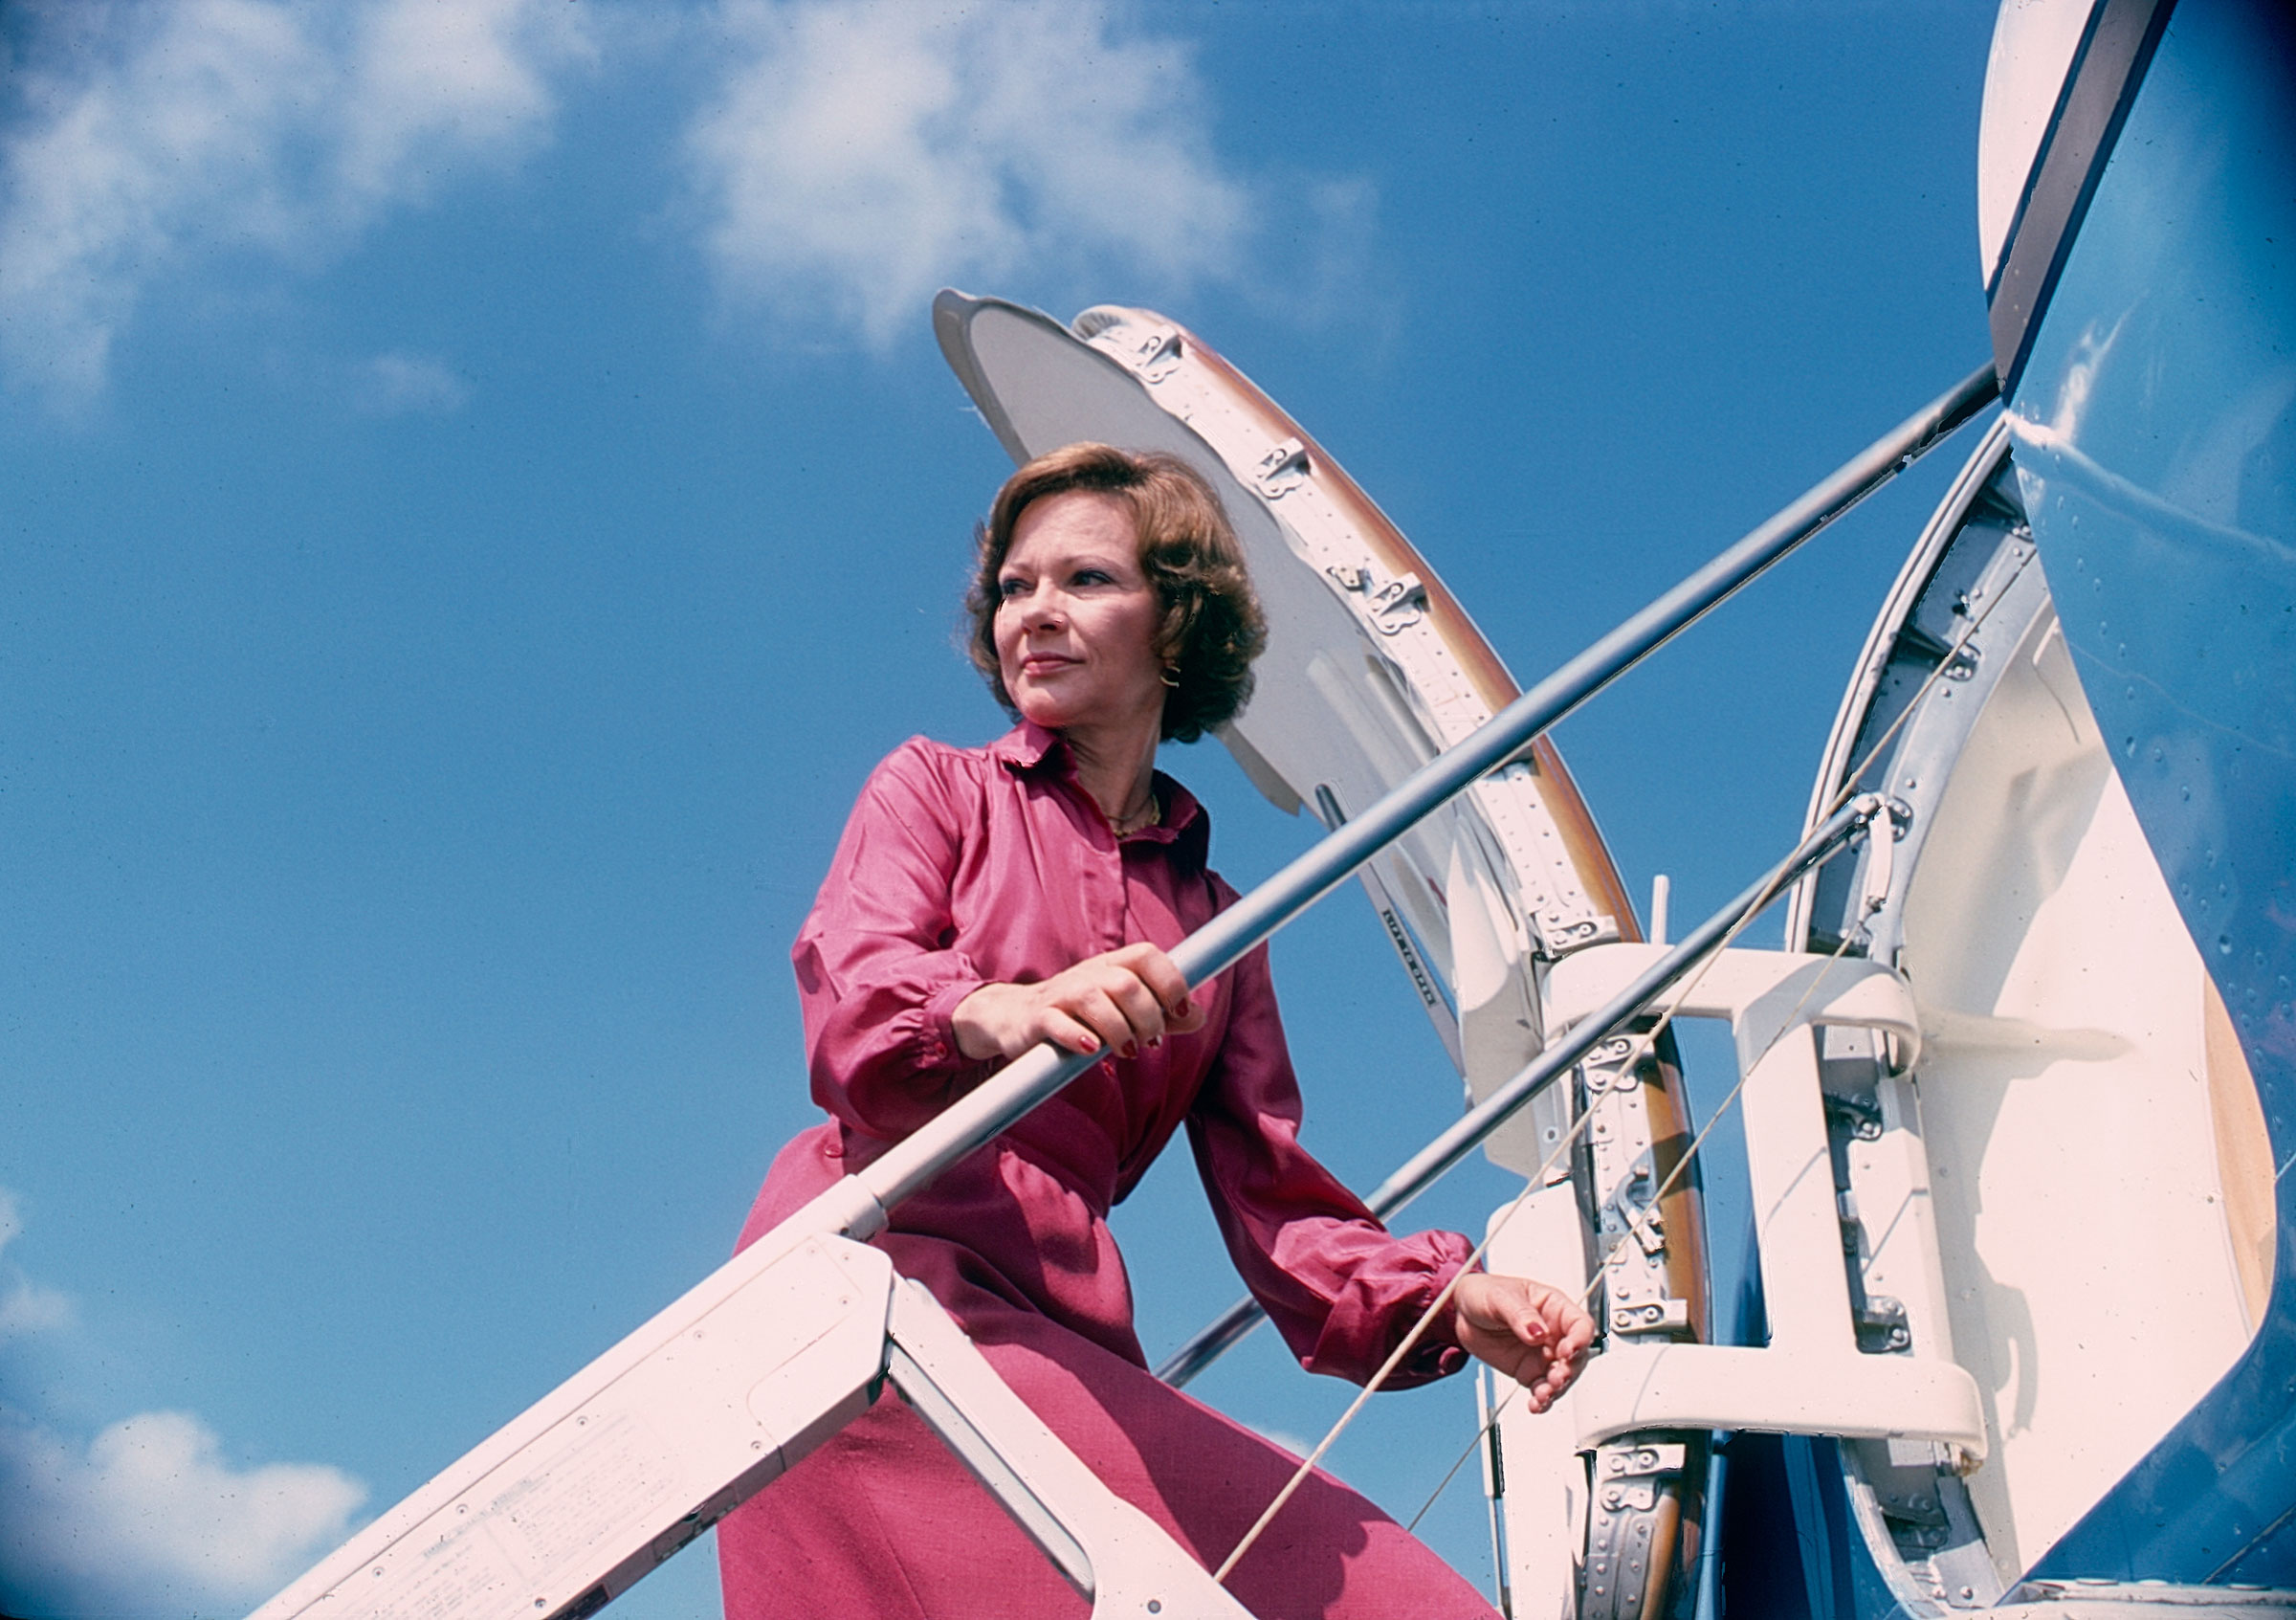 First Lady Rosalynn Carter climbs the steps to her plane during a trip, Texas, Sept. 1978. (Diana Walker—Getty Images)